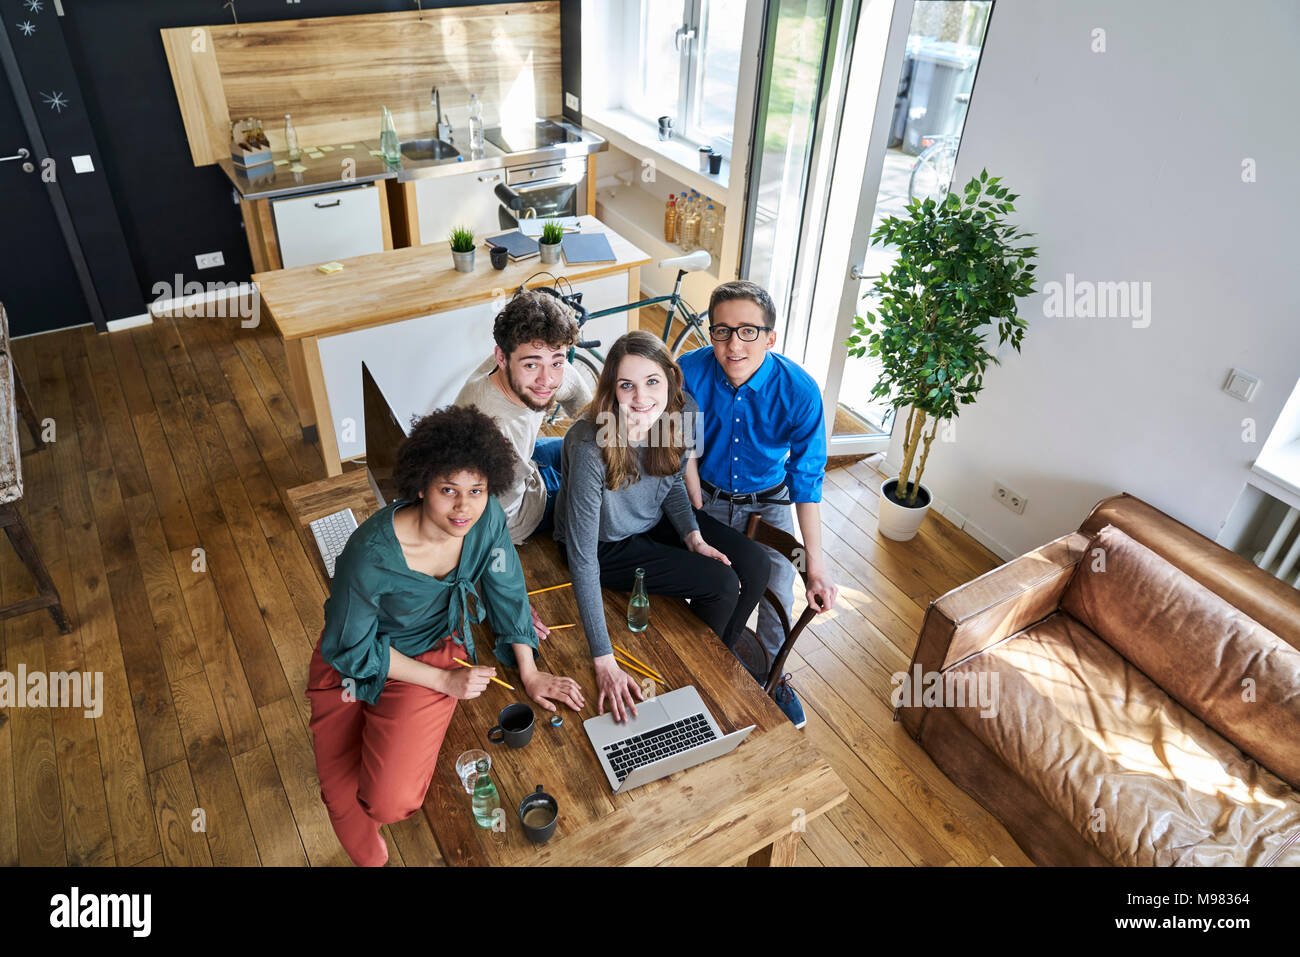 Elevated view of smiling coworkers in office Stock Photo